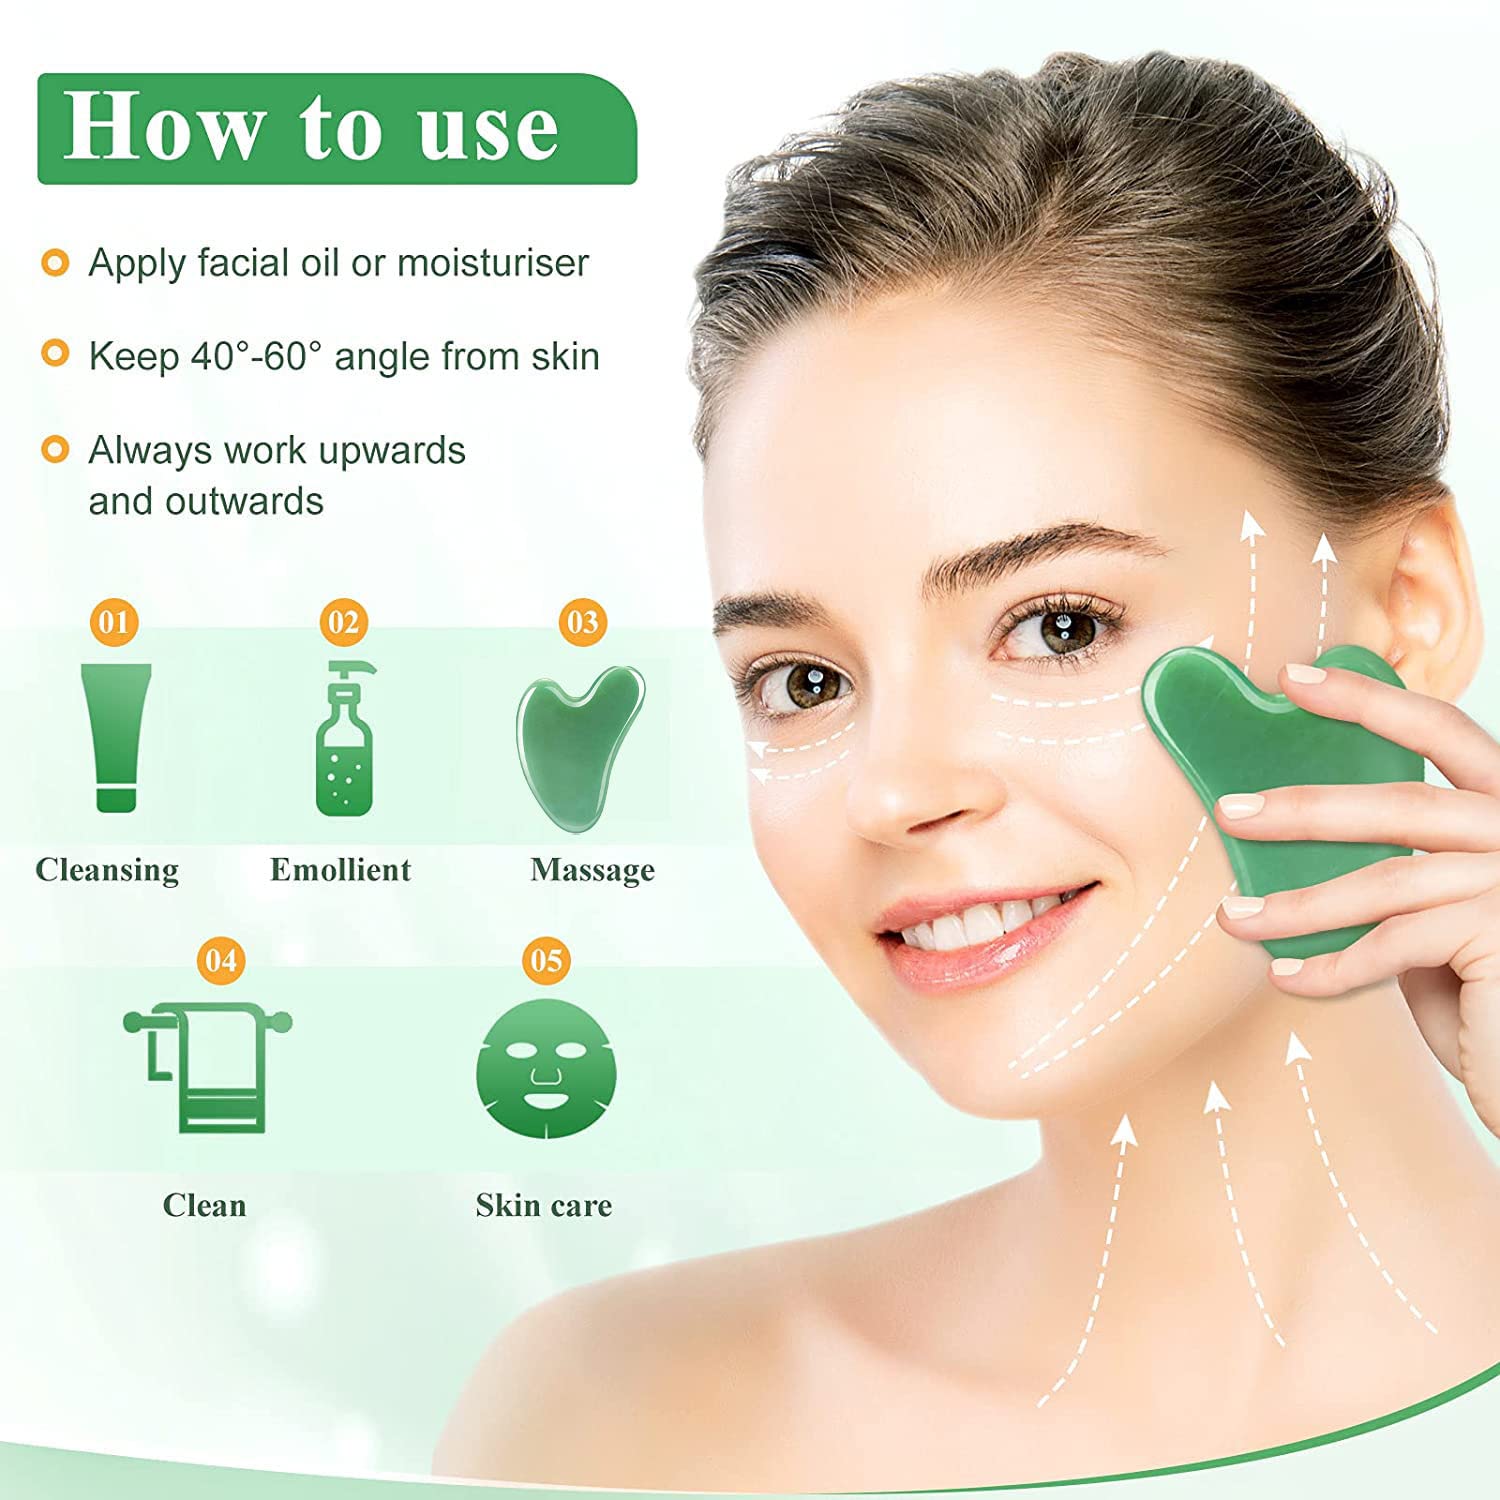 Gua Sha Facial Tools, Jade Gua Sha Stones Massage Scraping for Physical Therapy and SPA Acupuncture Therapy Used for Face, Eyes, Neck and Body (Green)